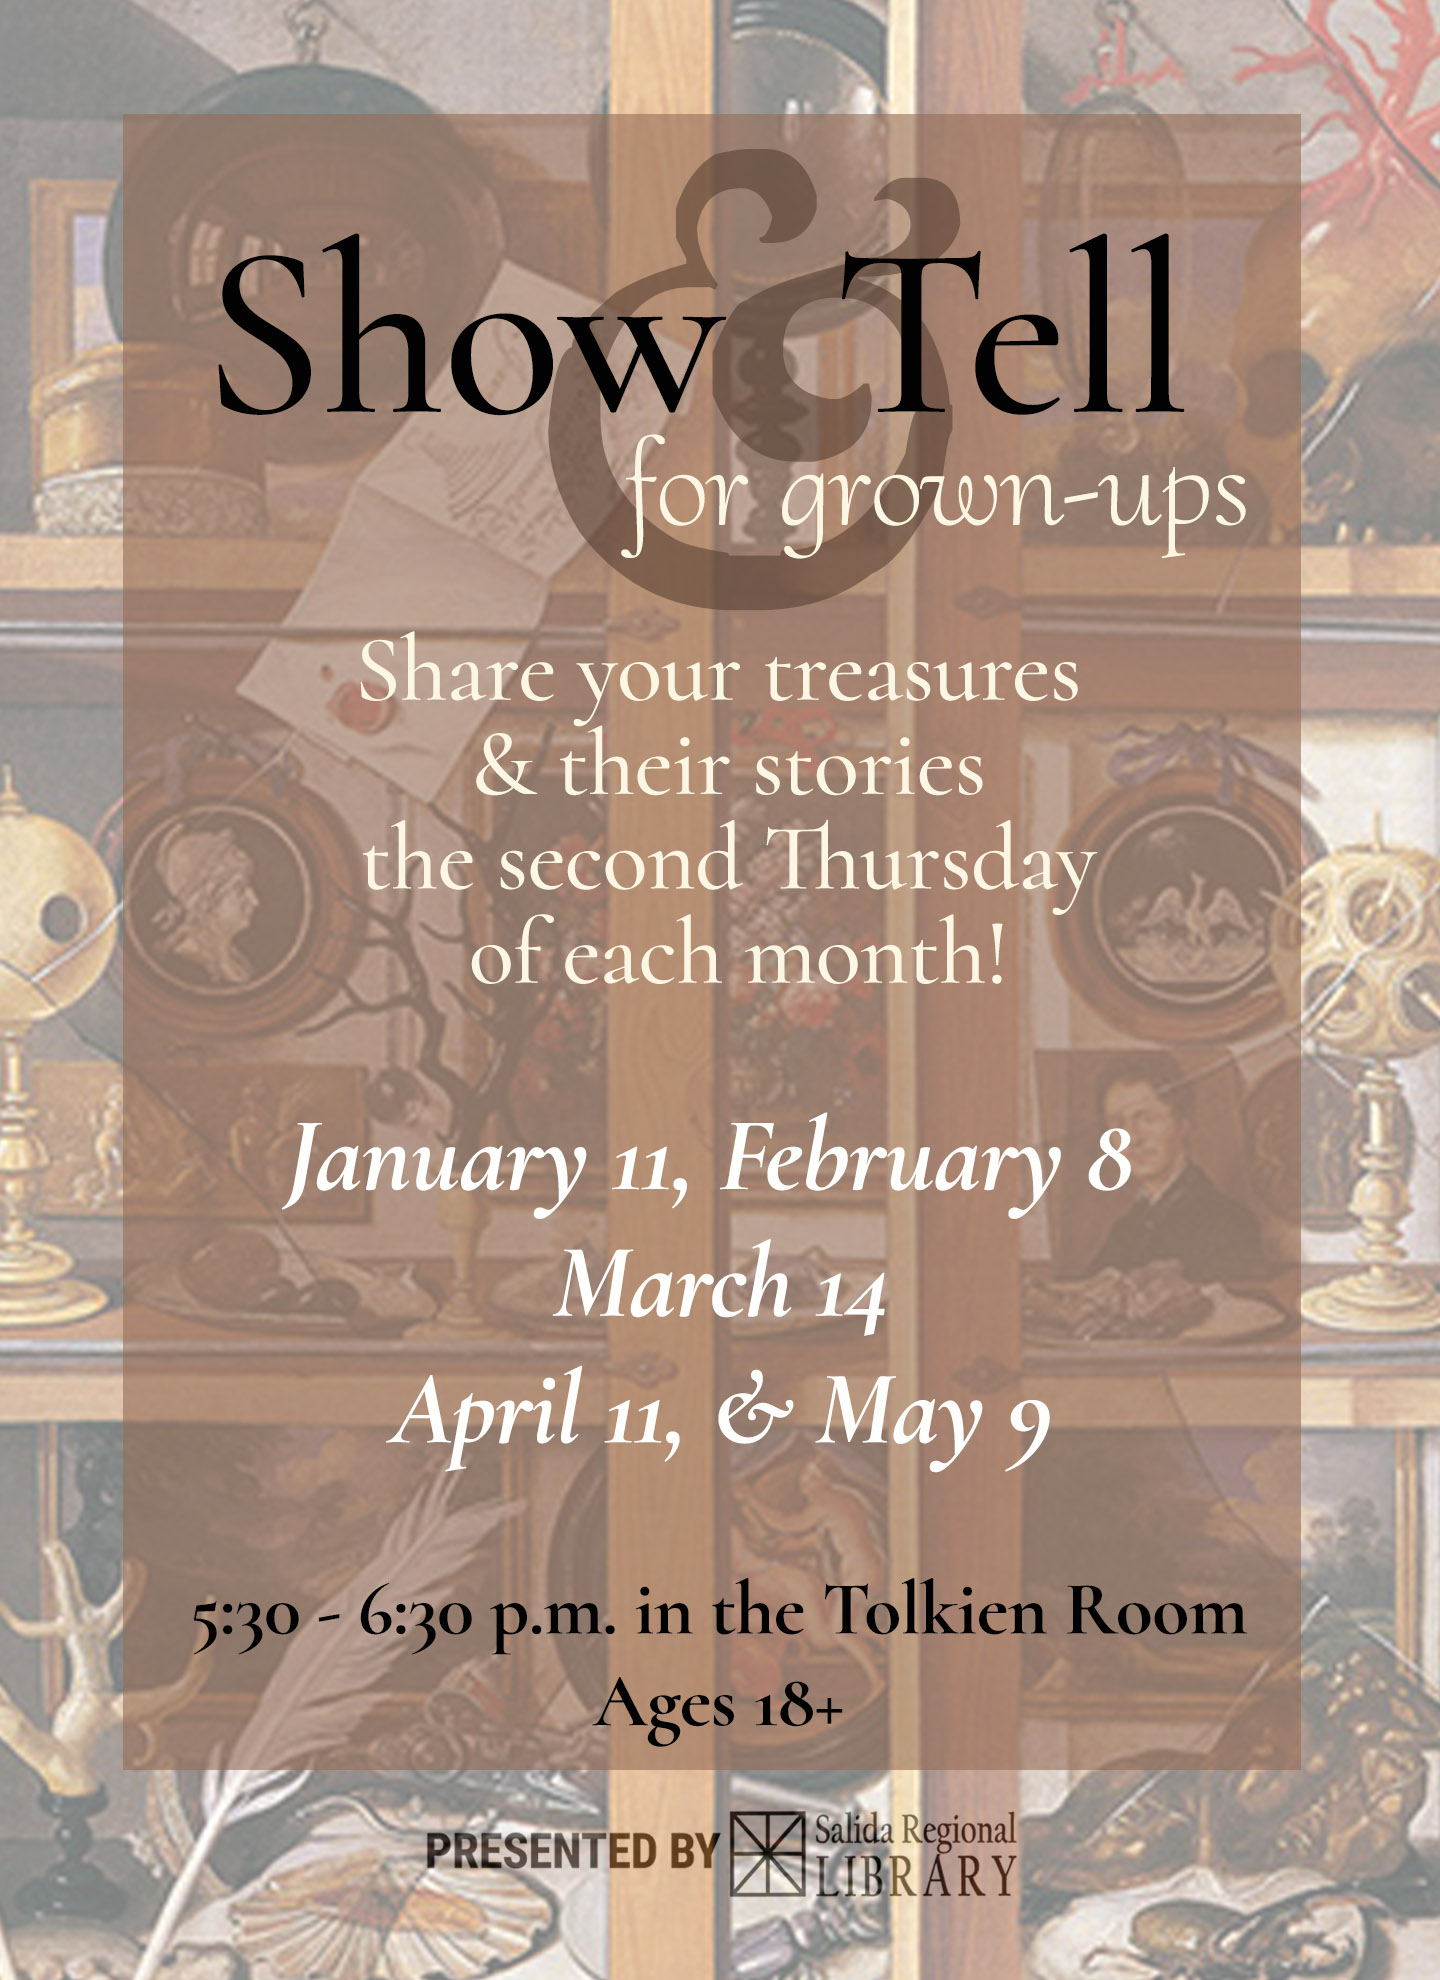 Show and Tell for grownups. Share your treasures and their stories the second Thursday of each month. January 11, February 8, March 14, April 11, and May 9. 5:30 to 6:30 p.m. in the Tolkien Room. Ages 18+